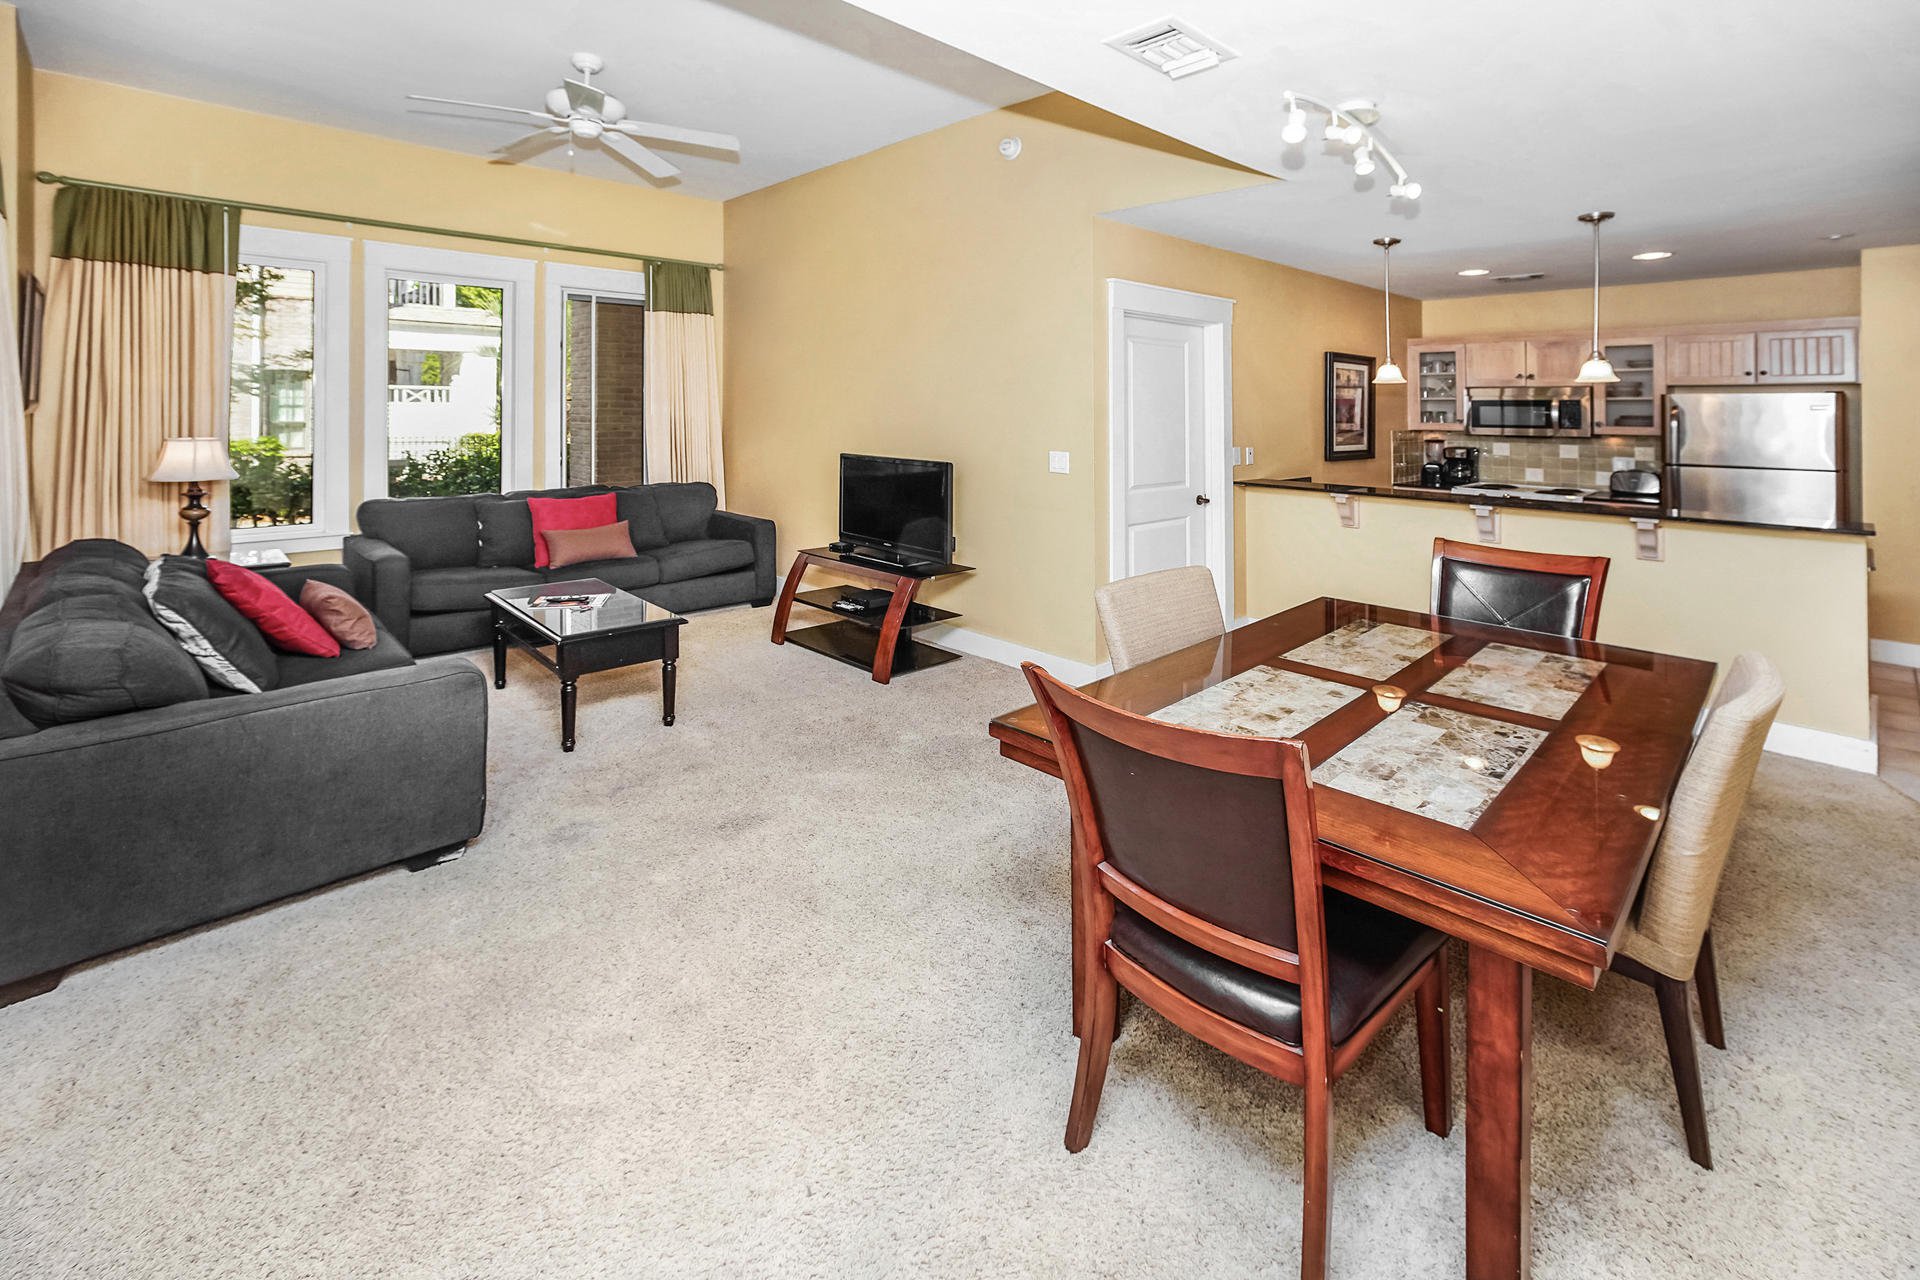 Property Image 2 - Exclusive Market Street Inn Condo in The Heart of Baytowne Wharf